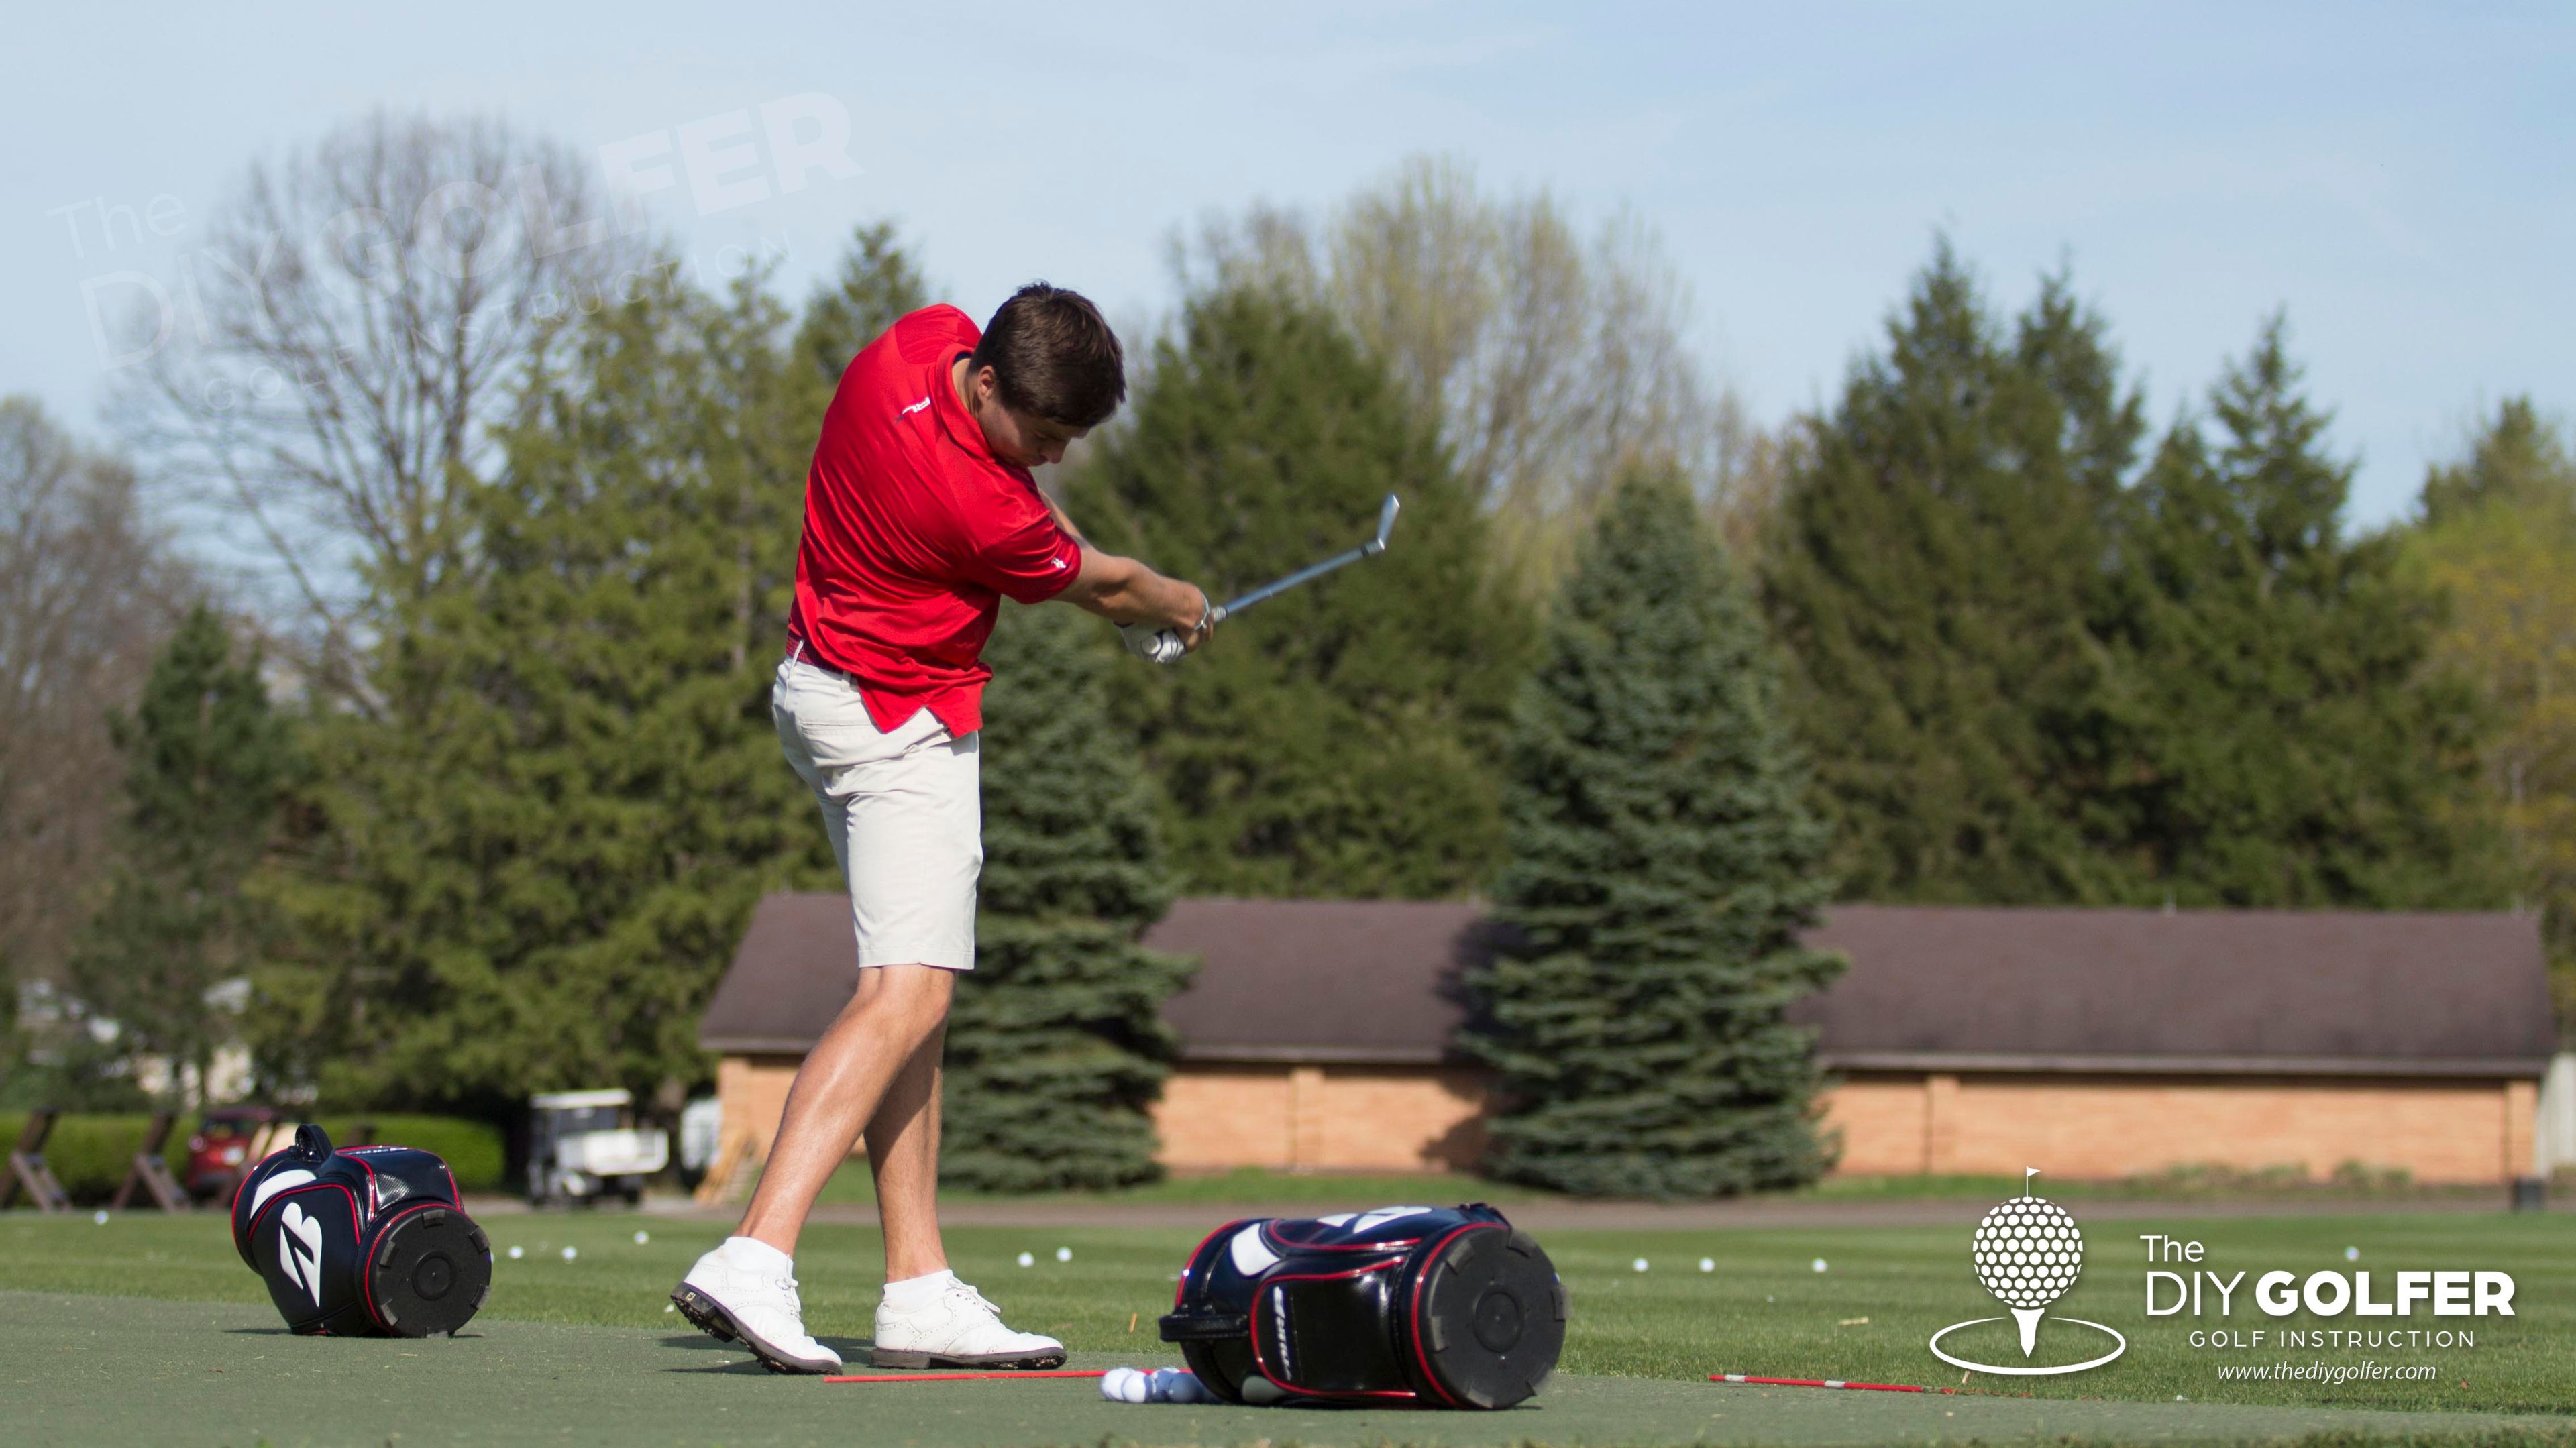 Tips for Practicing Your Golf Swing in the Winter